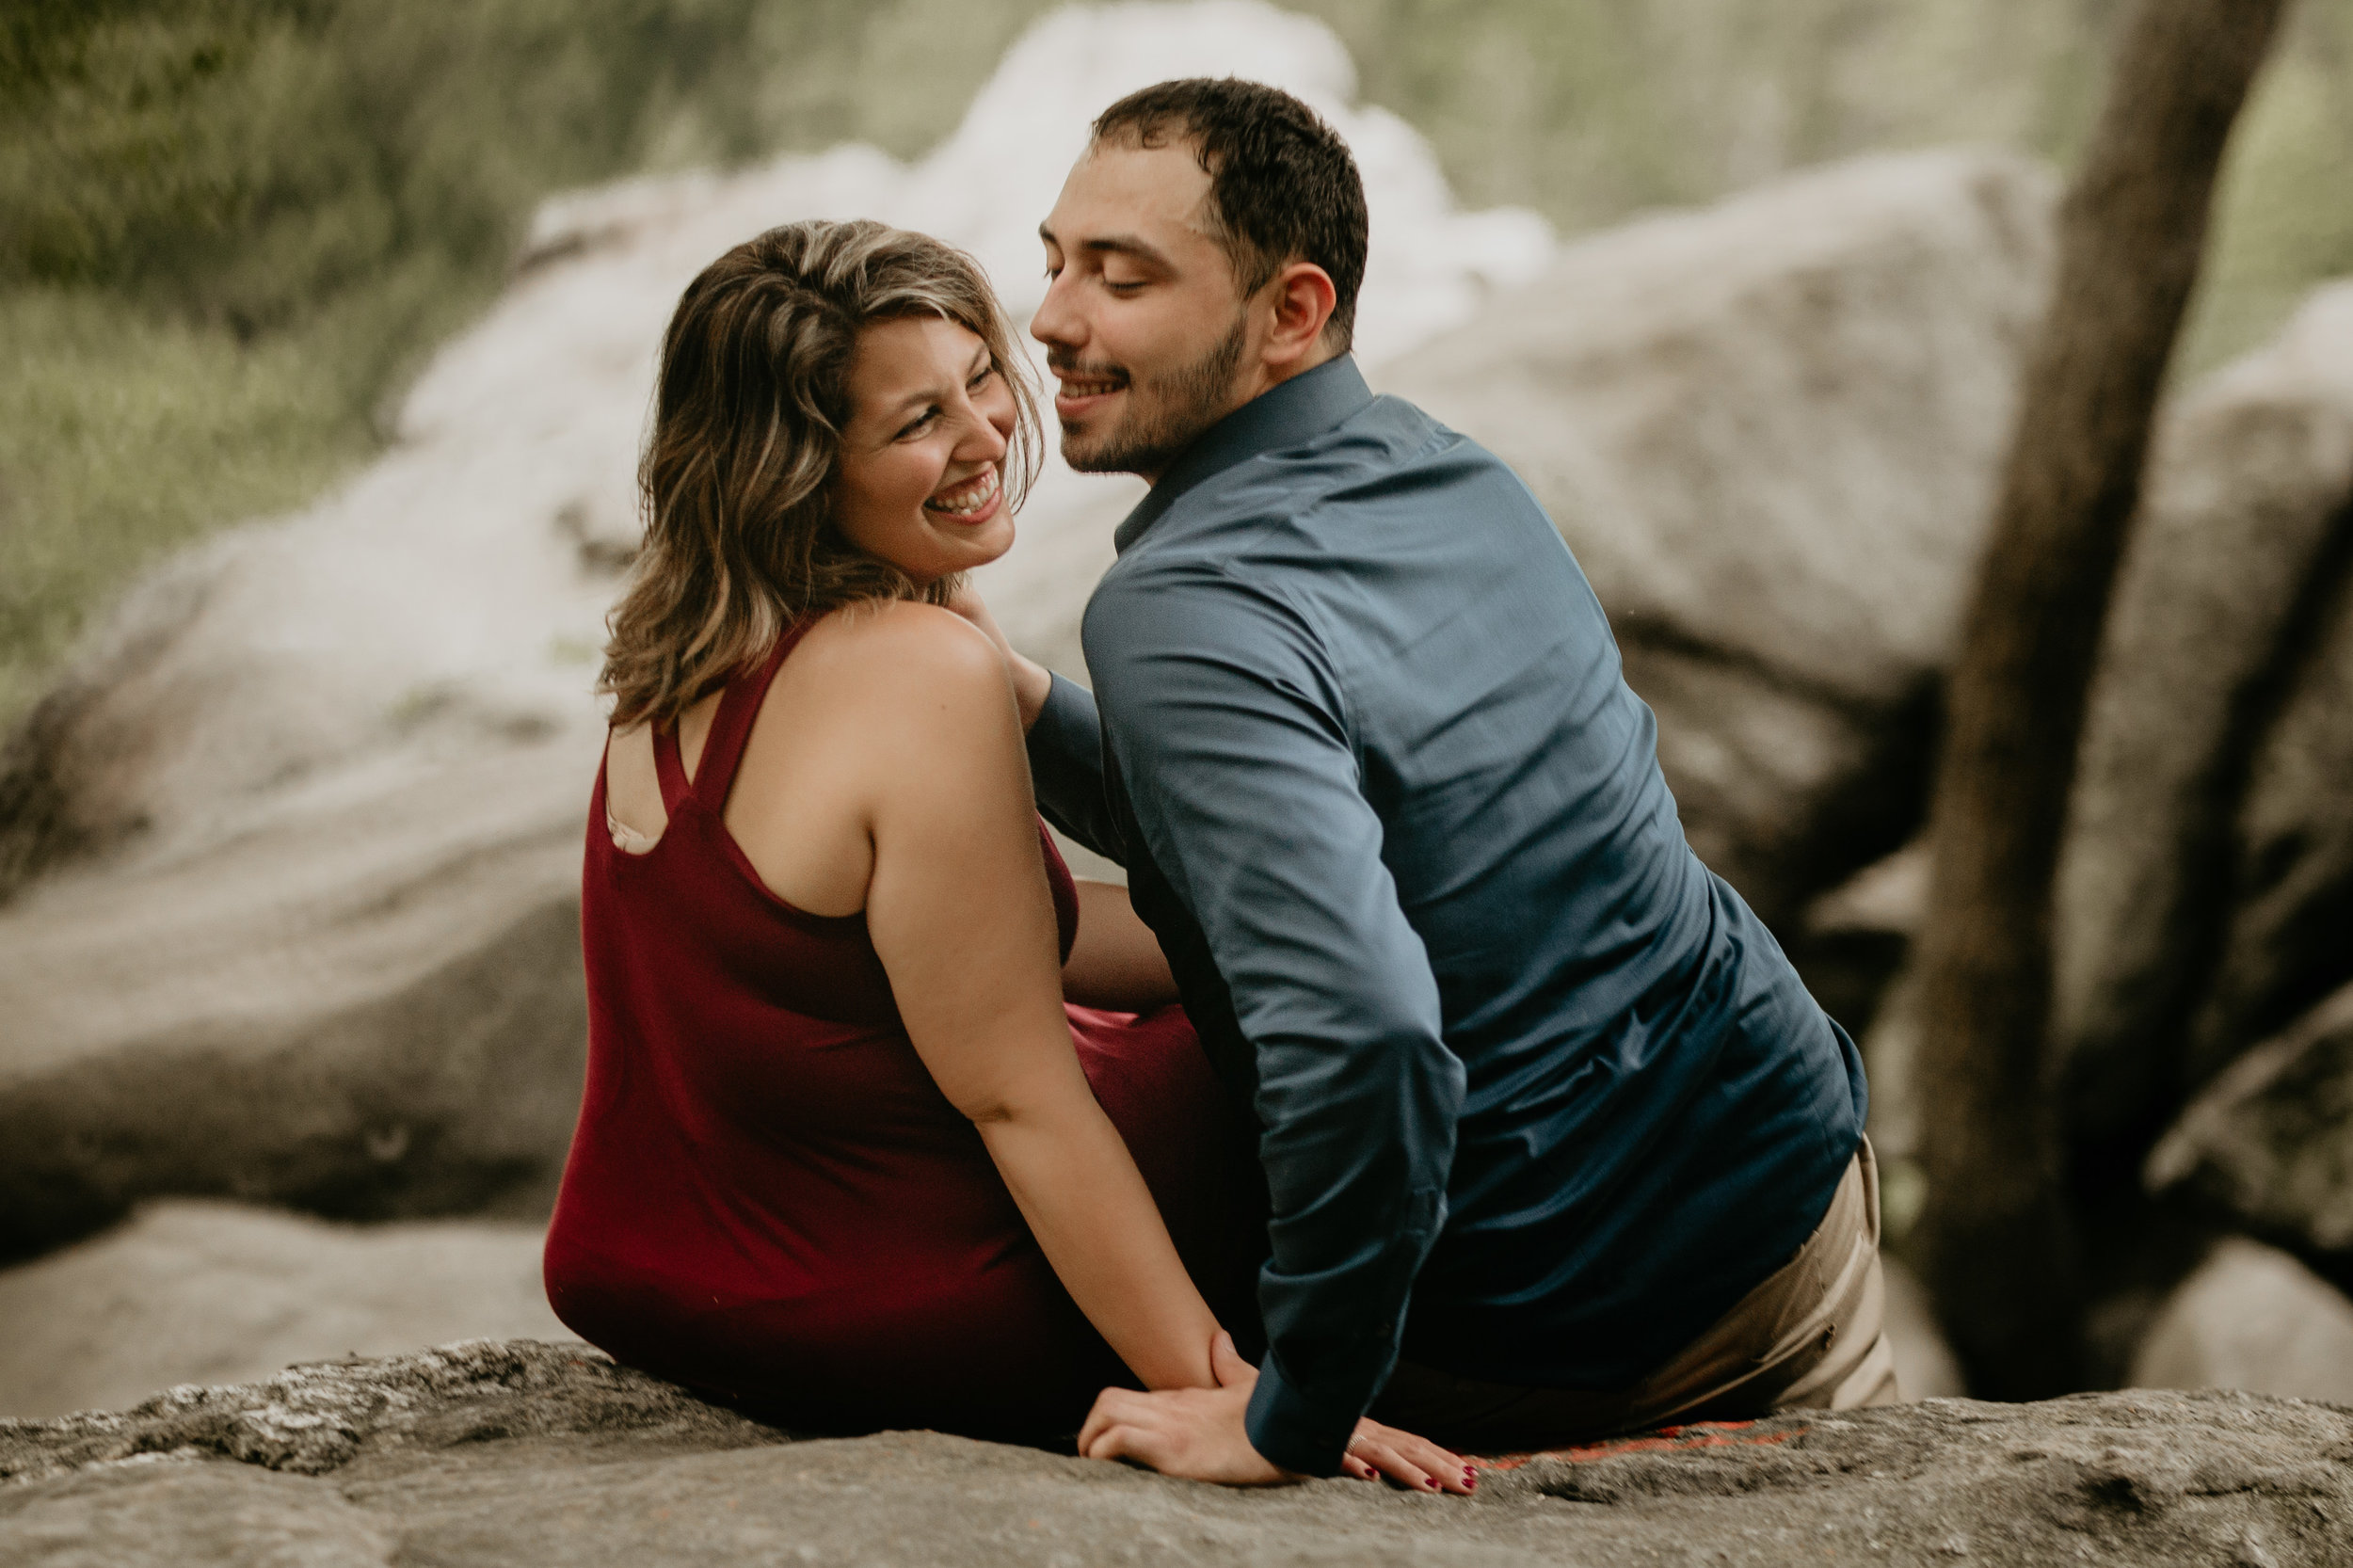 Nicole-Daacke-Photography-rock-state-park-overlook-king-queen-seat-maryland-hiking-adventure-engagement-session-photos-portraits-summer-bel-air-dog-engagement-session-21.jpg